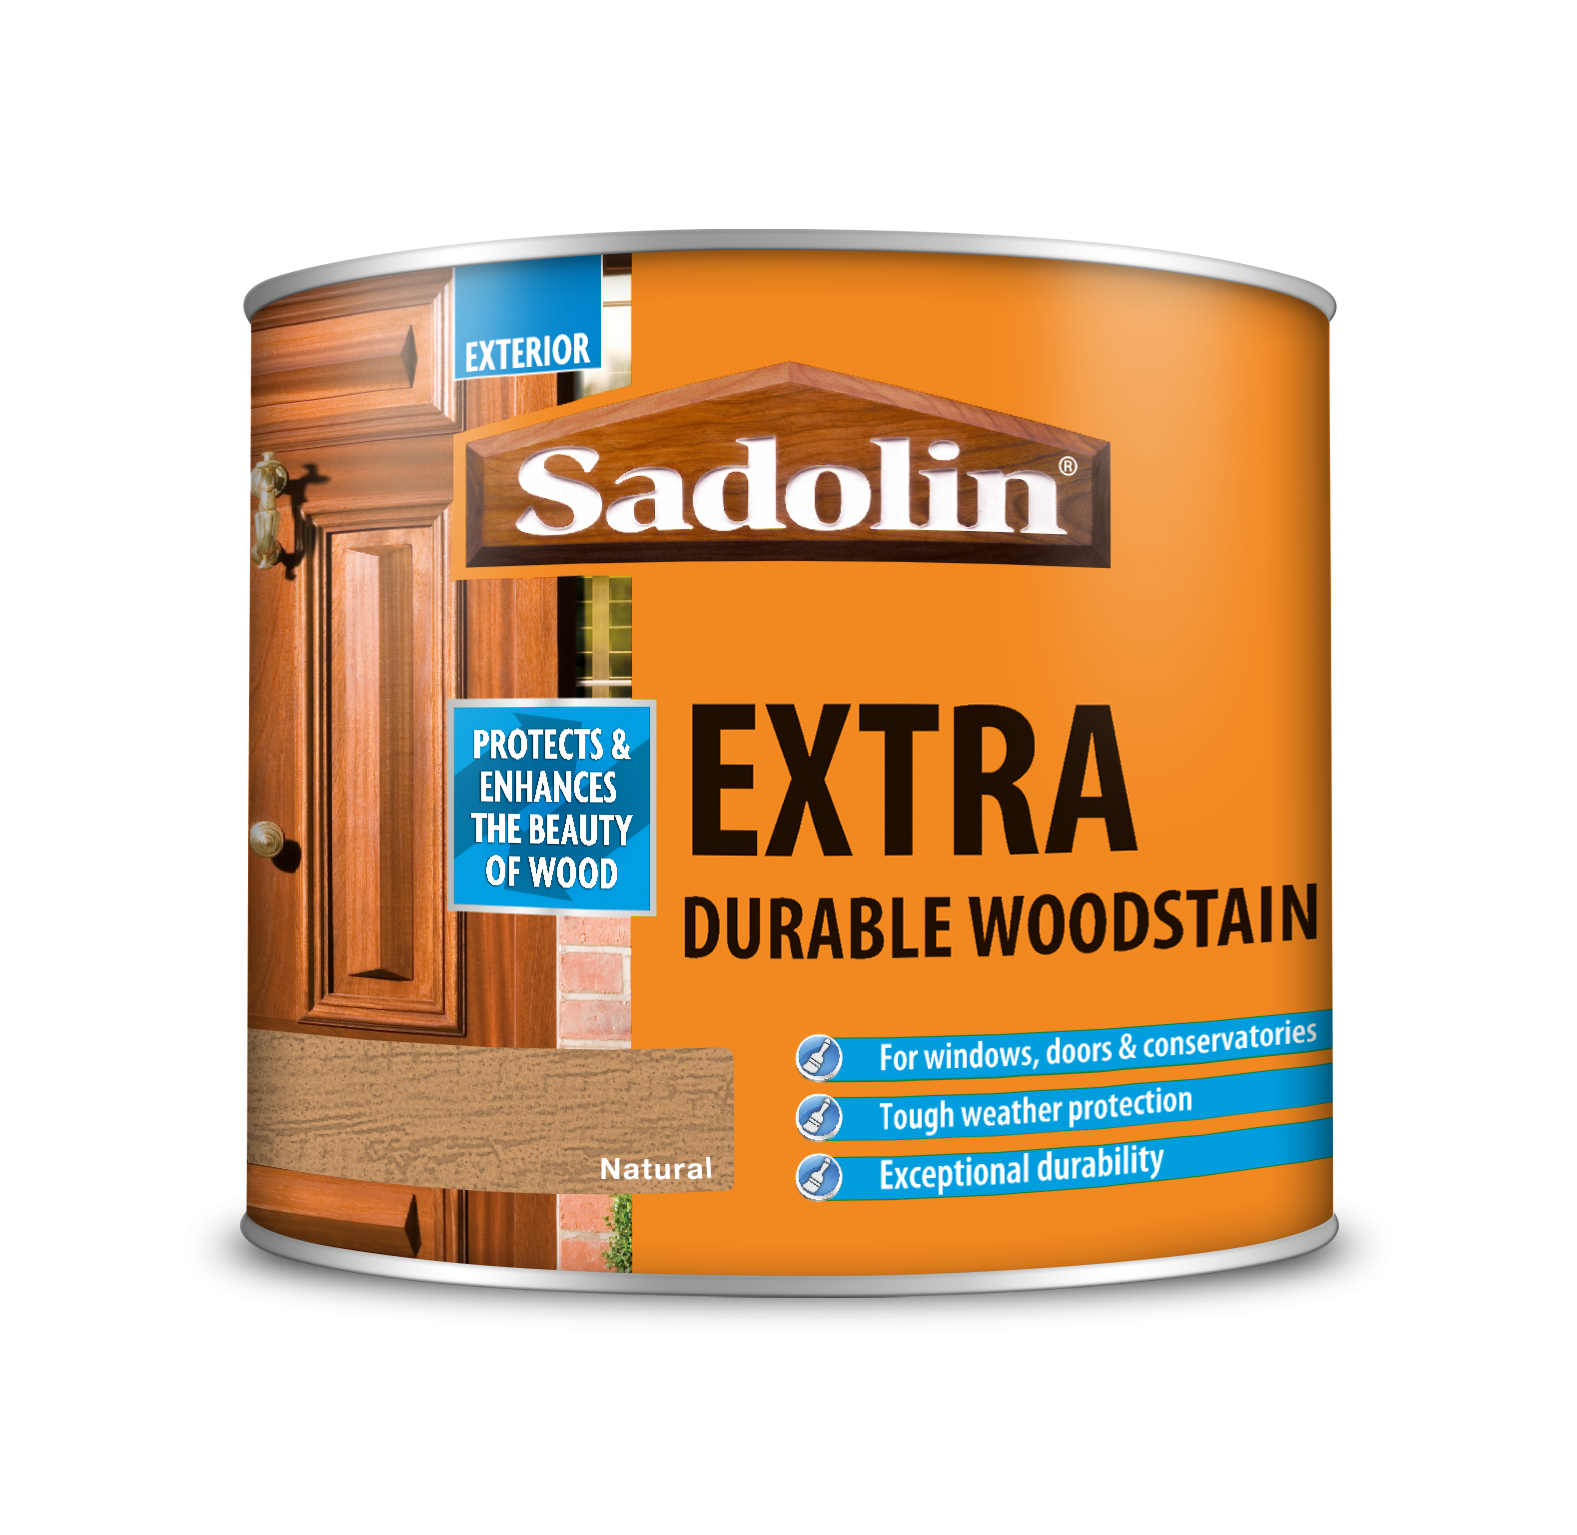 Sadolin Extra Durable Woodstain Natural 500ml [MPPSSVG]  5028577